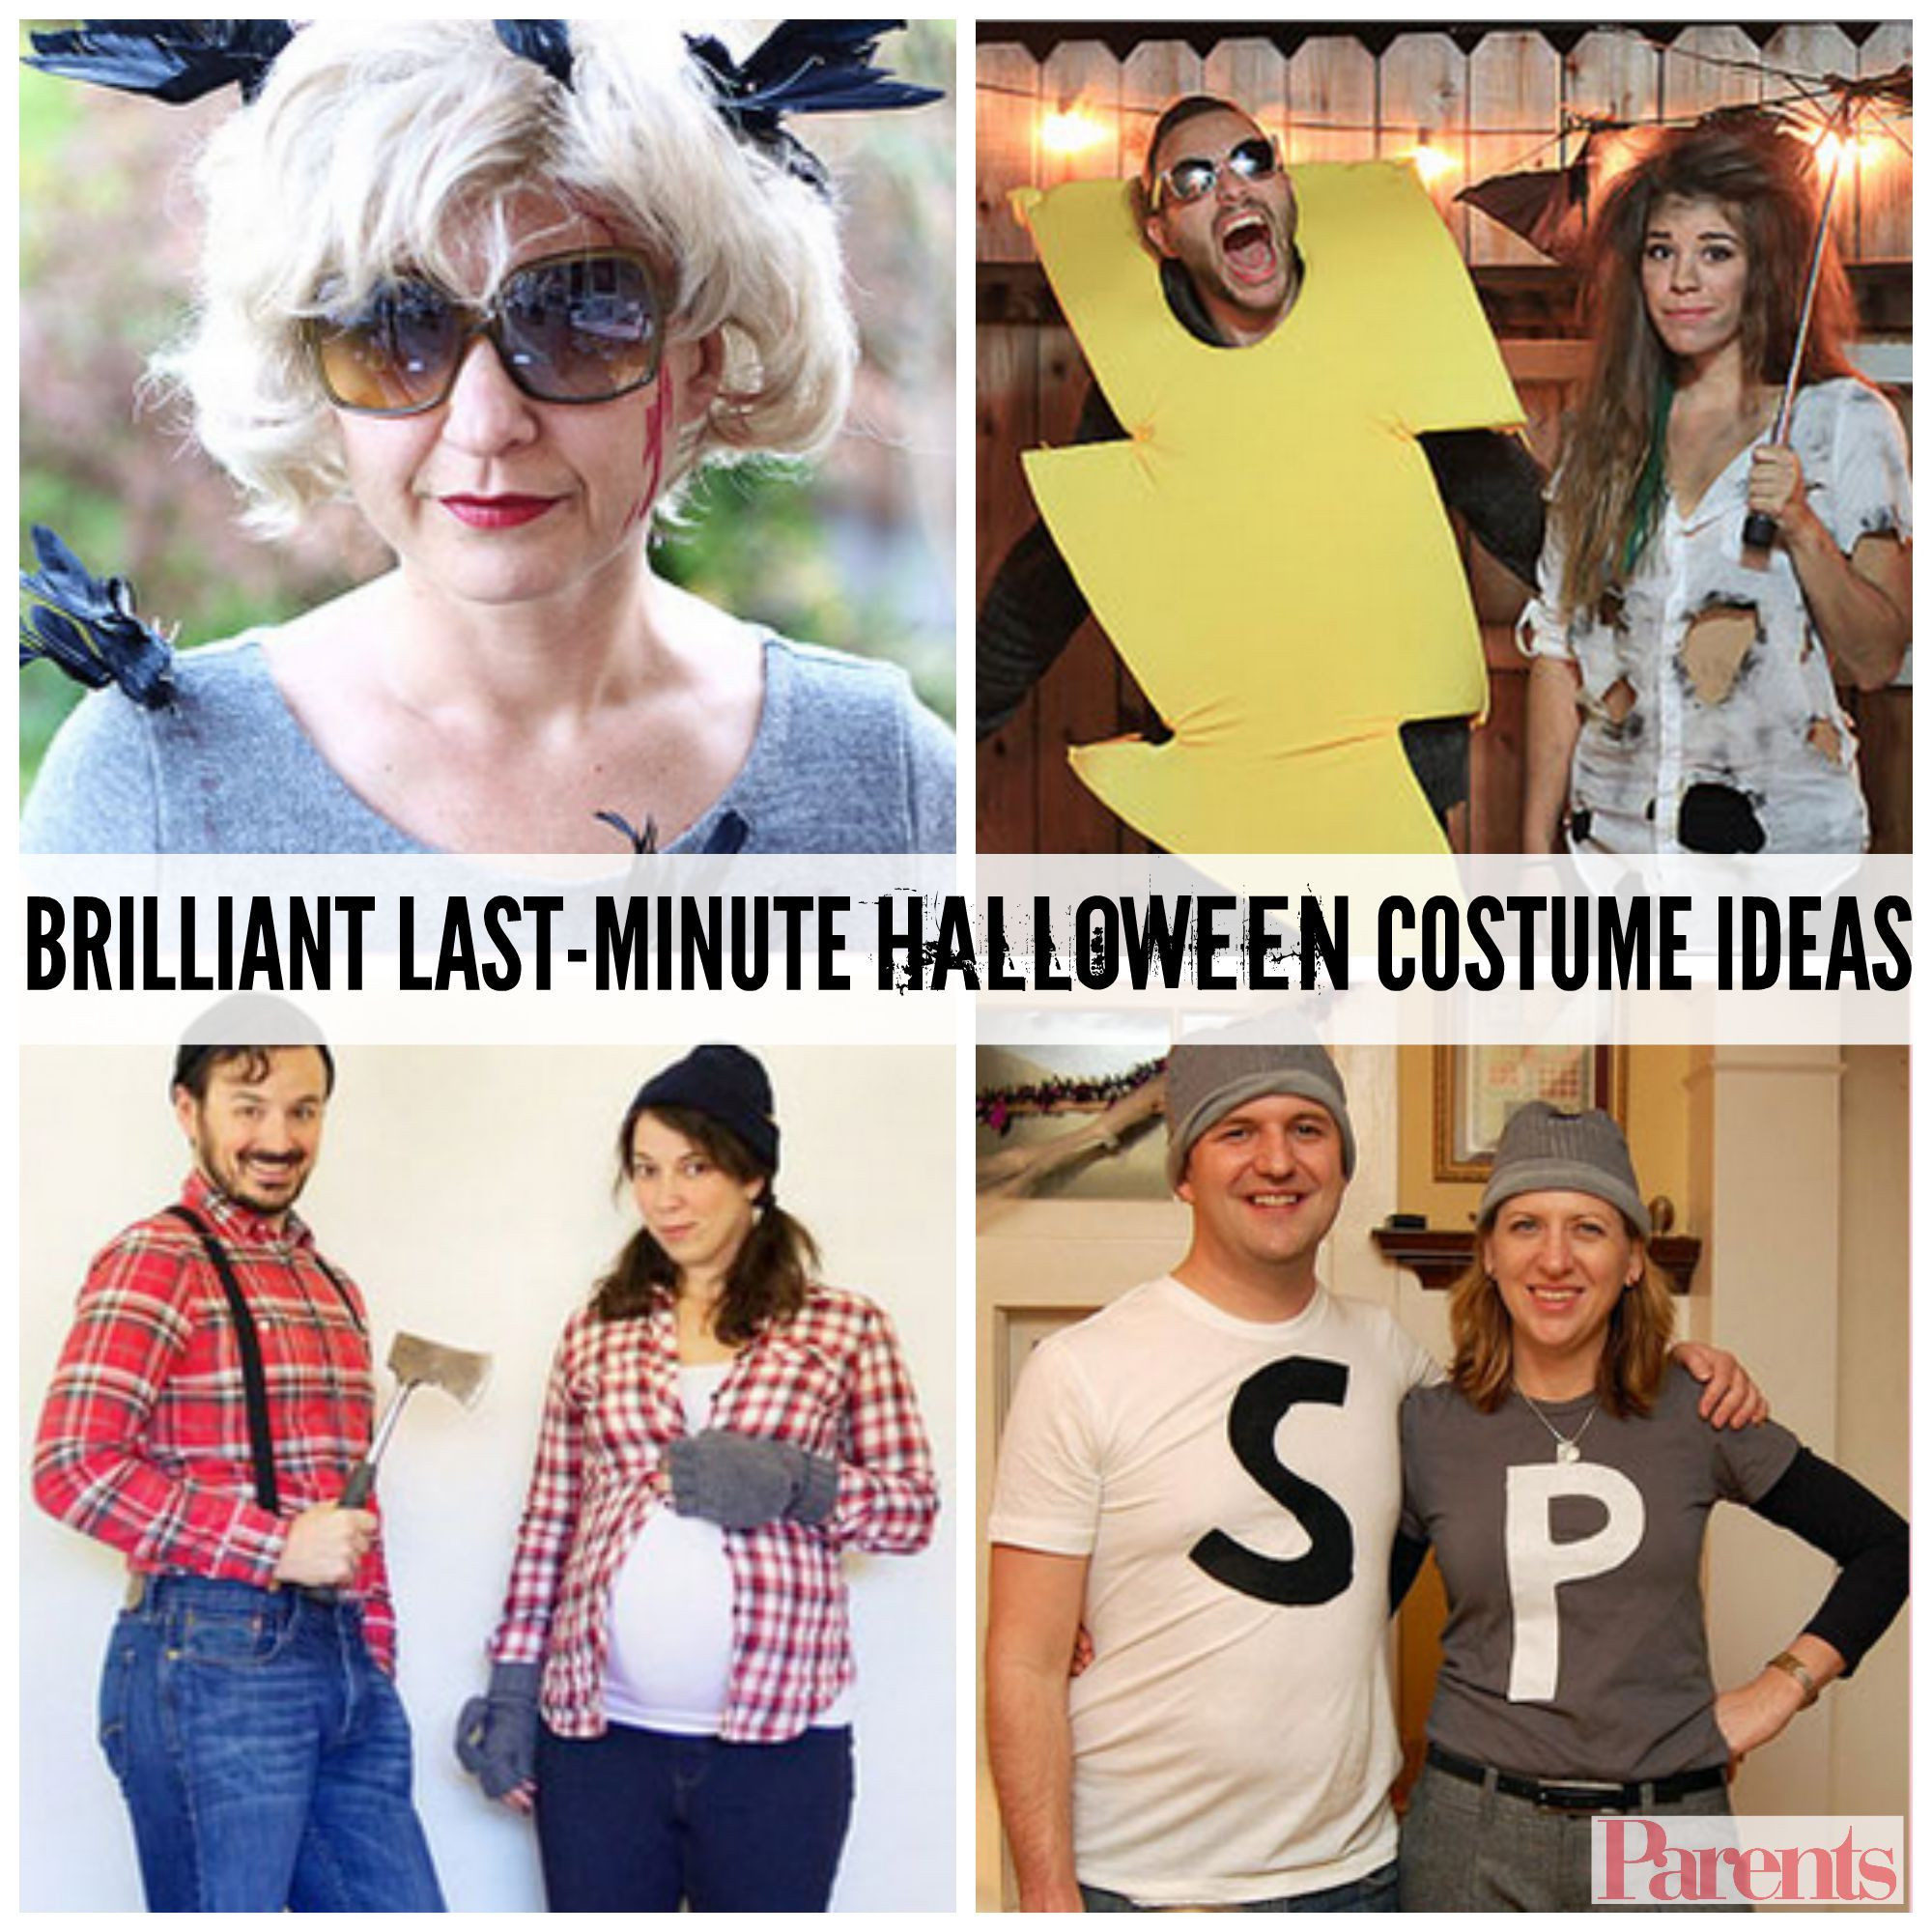 Last Minute DIY Halloween Costumes For Adults
 The Best Last Minute Halloween Costumes for Adults